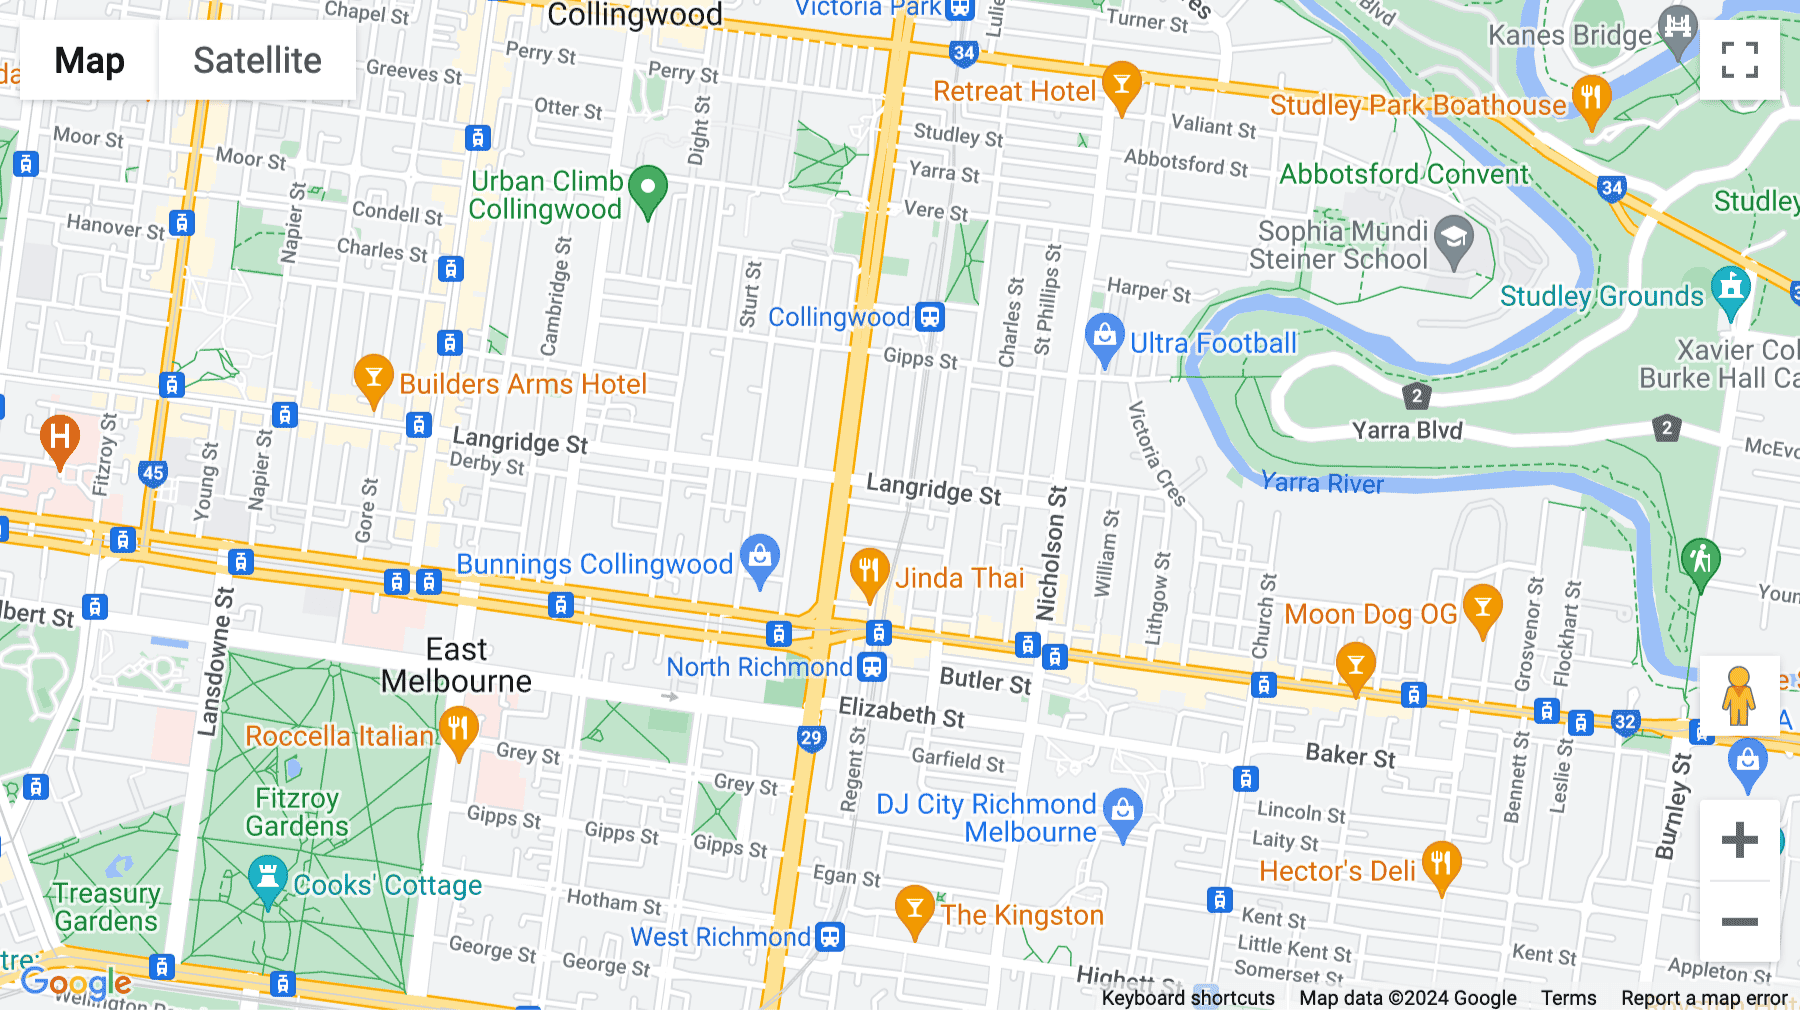 Click for interative map of 4 Bloomburg Street, Collingwood, VIC, Melbourne